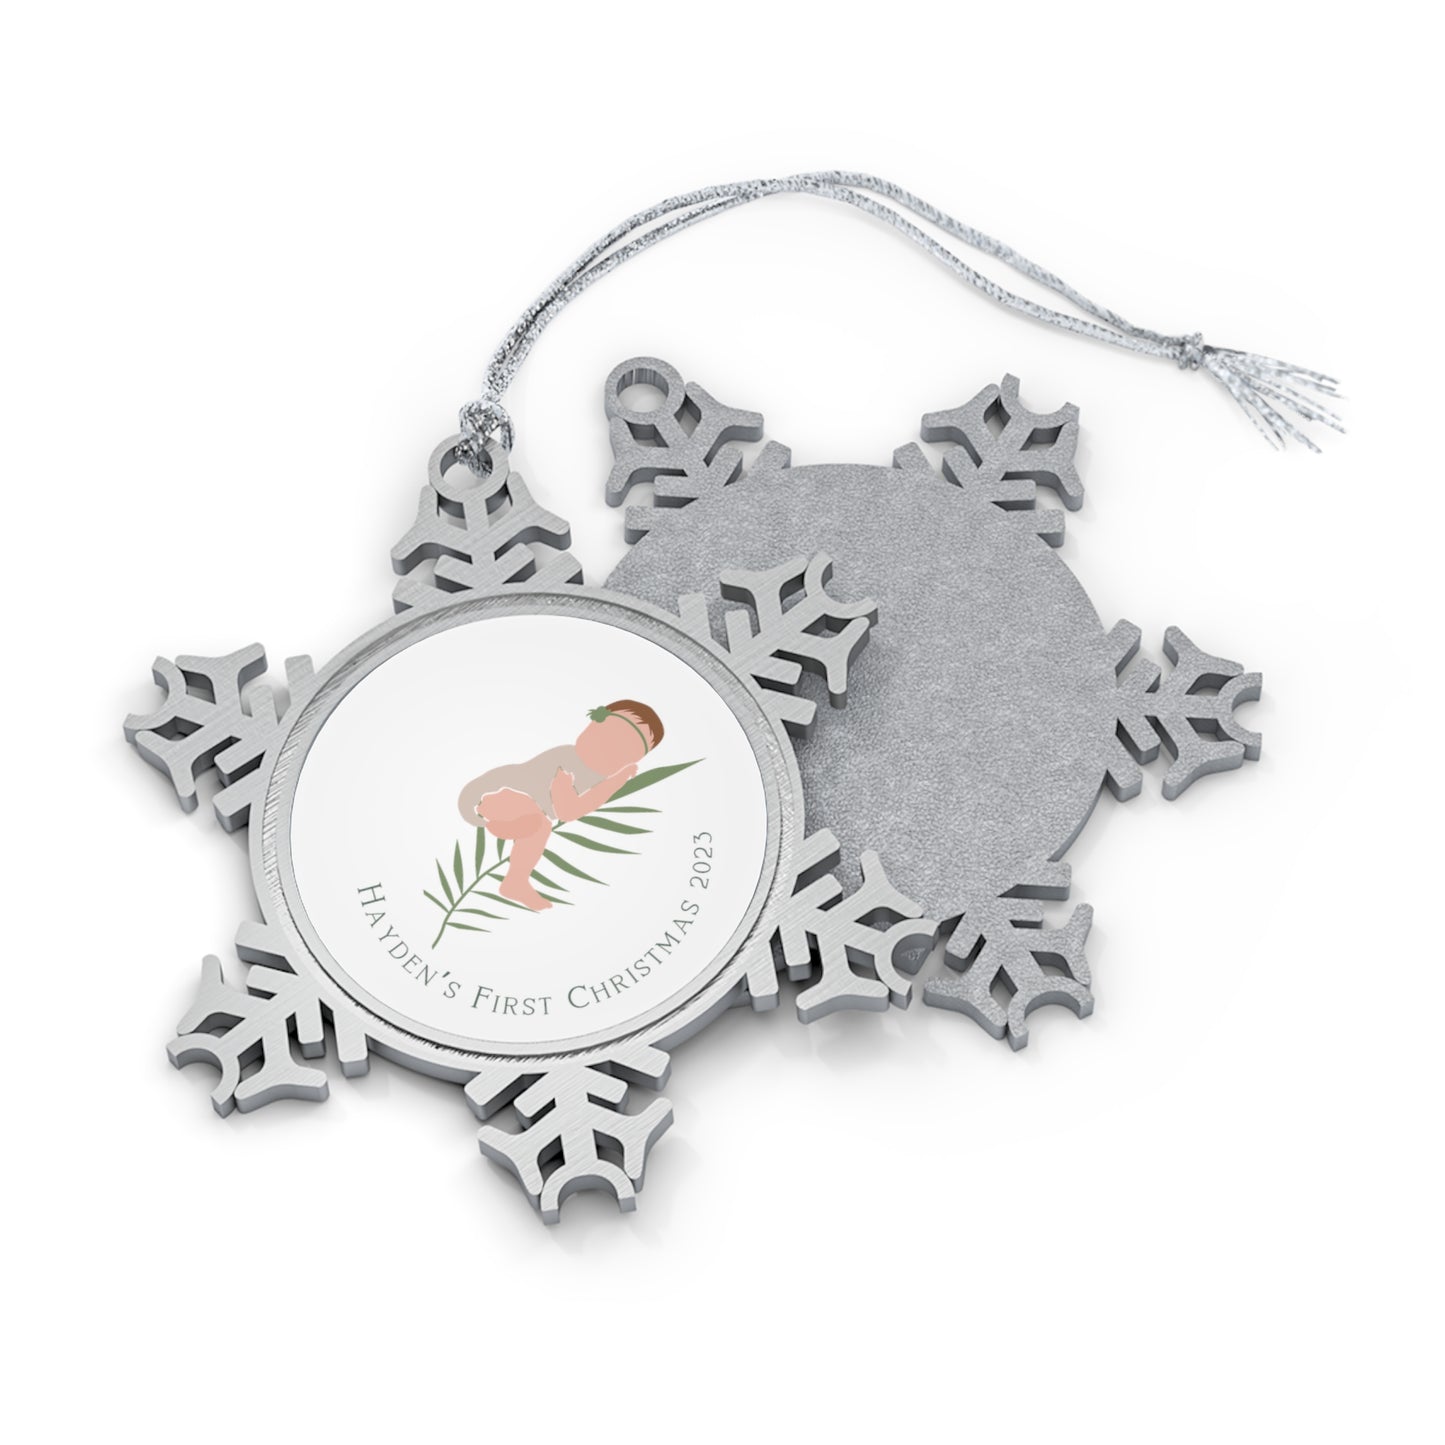 Personalised Pewter Snowflake Ornament | Baby's First Christmas